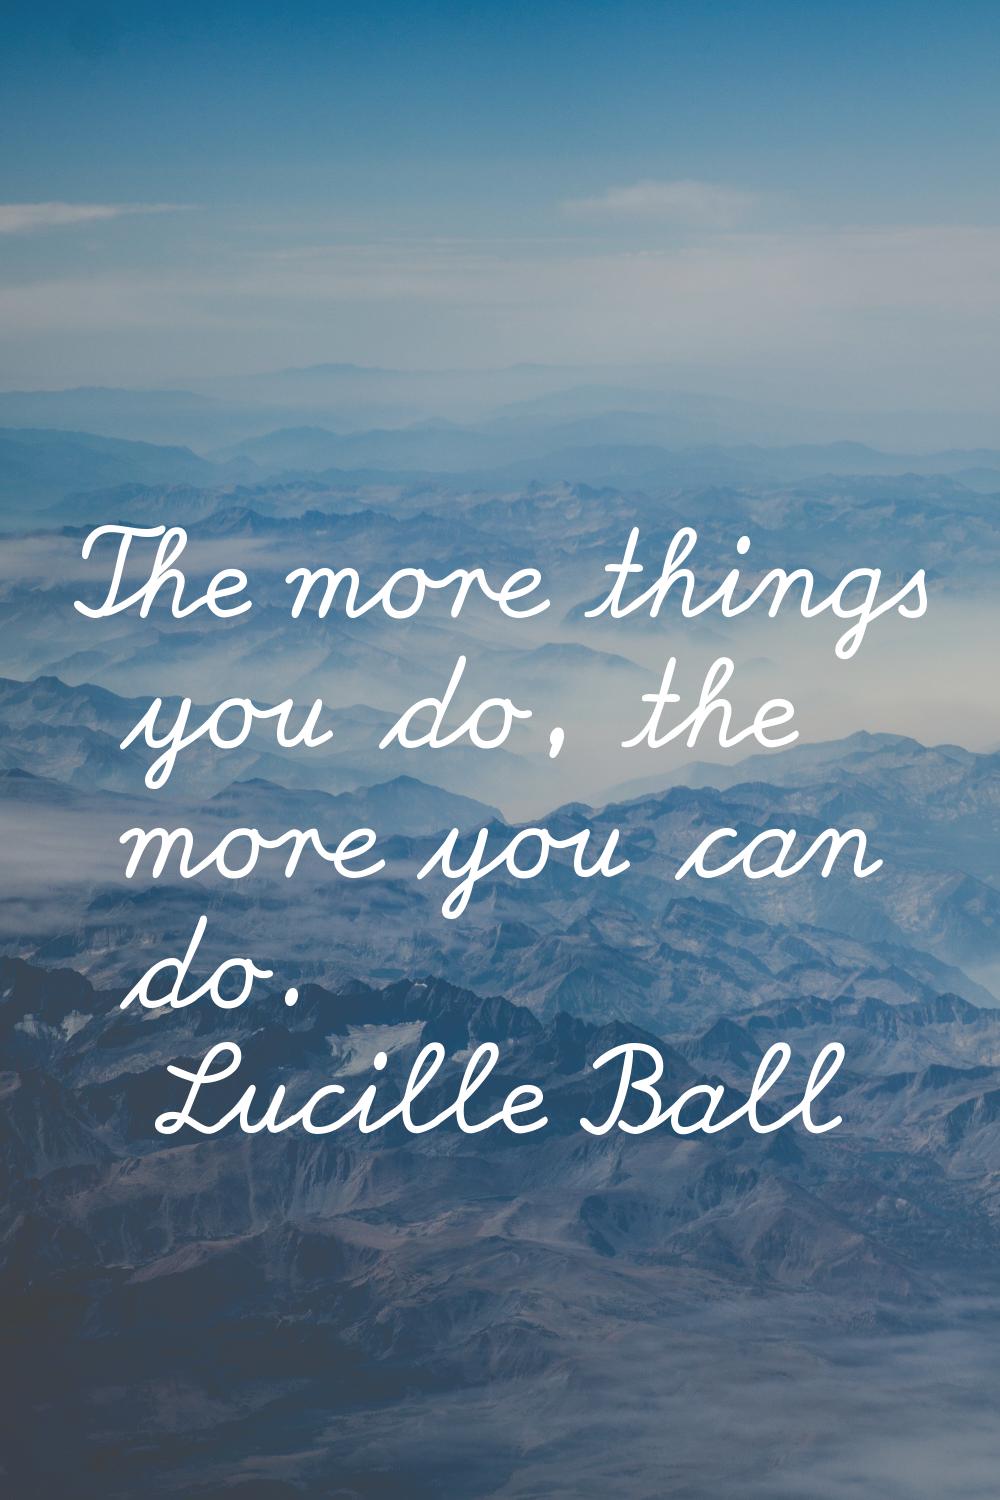 The more things you do, the more you can do.